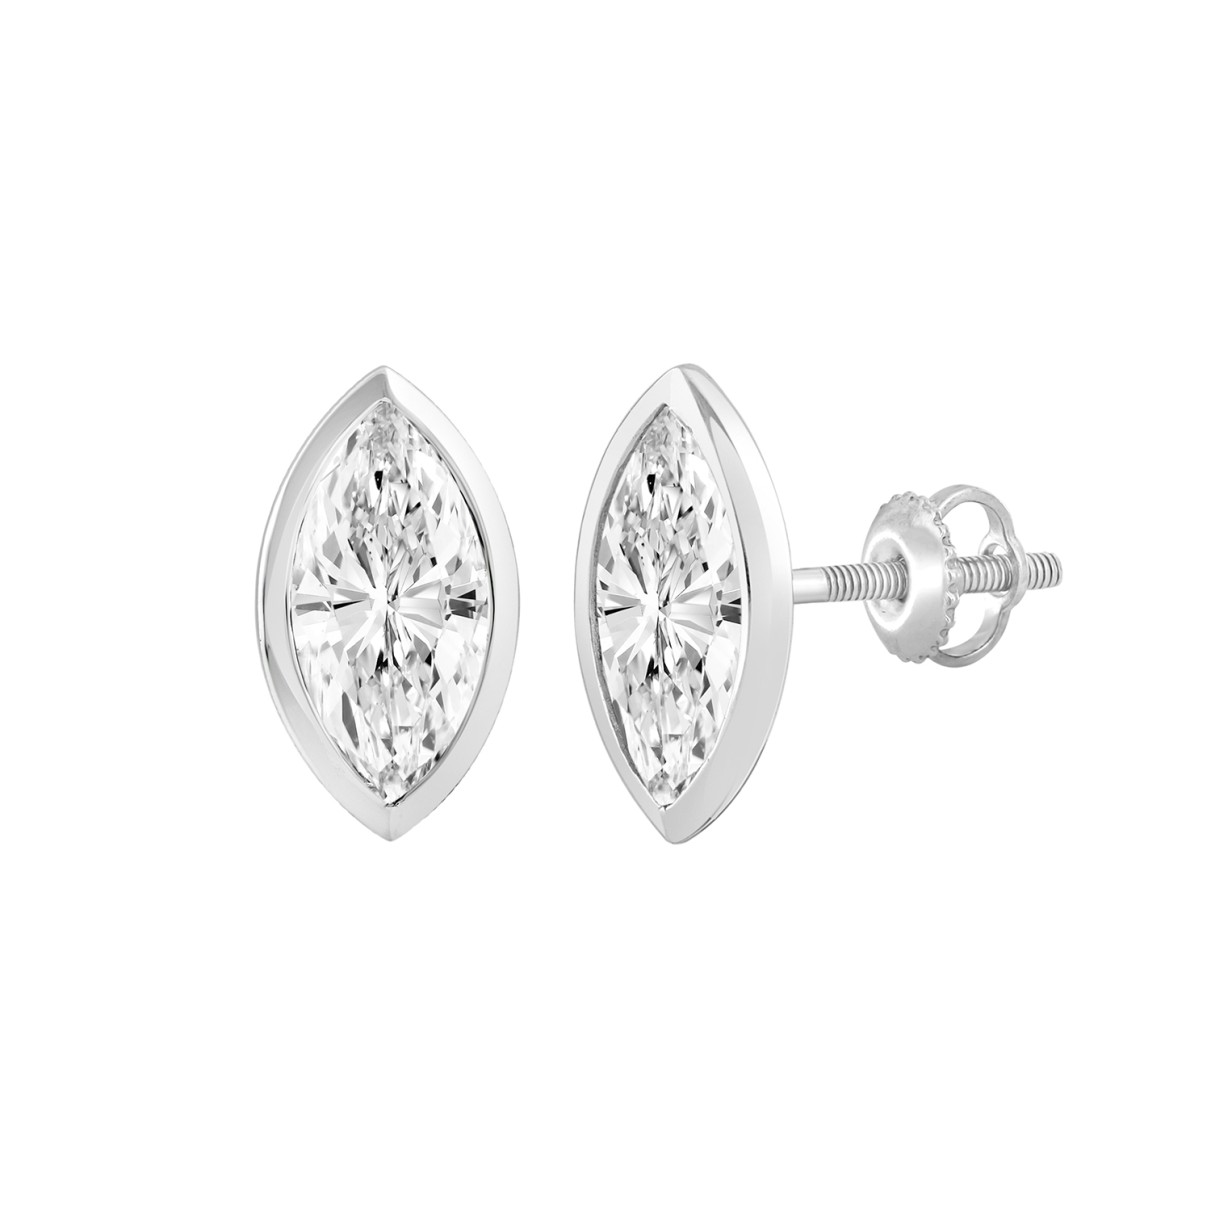 LADIES SOLITAIRE EARRINGS 3CT MARQUISE DIAMOND 14K WHITE GOLD